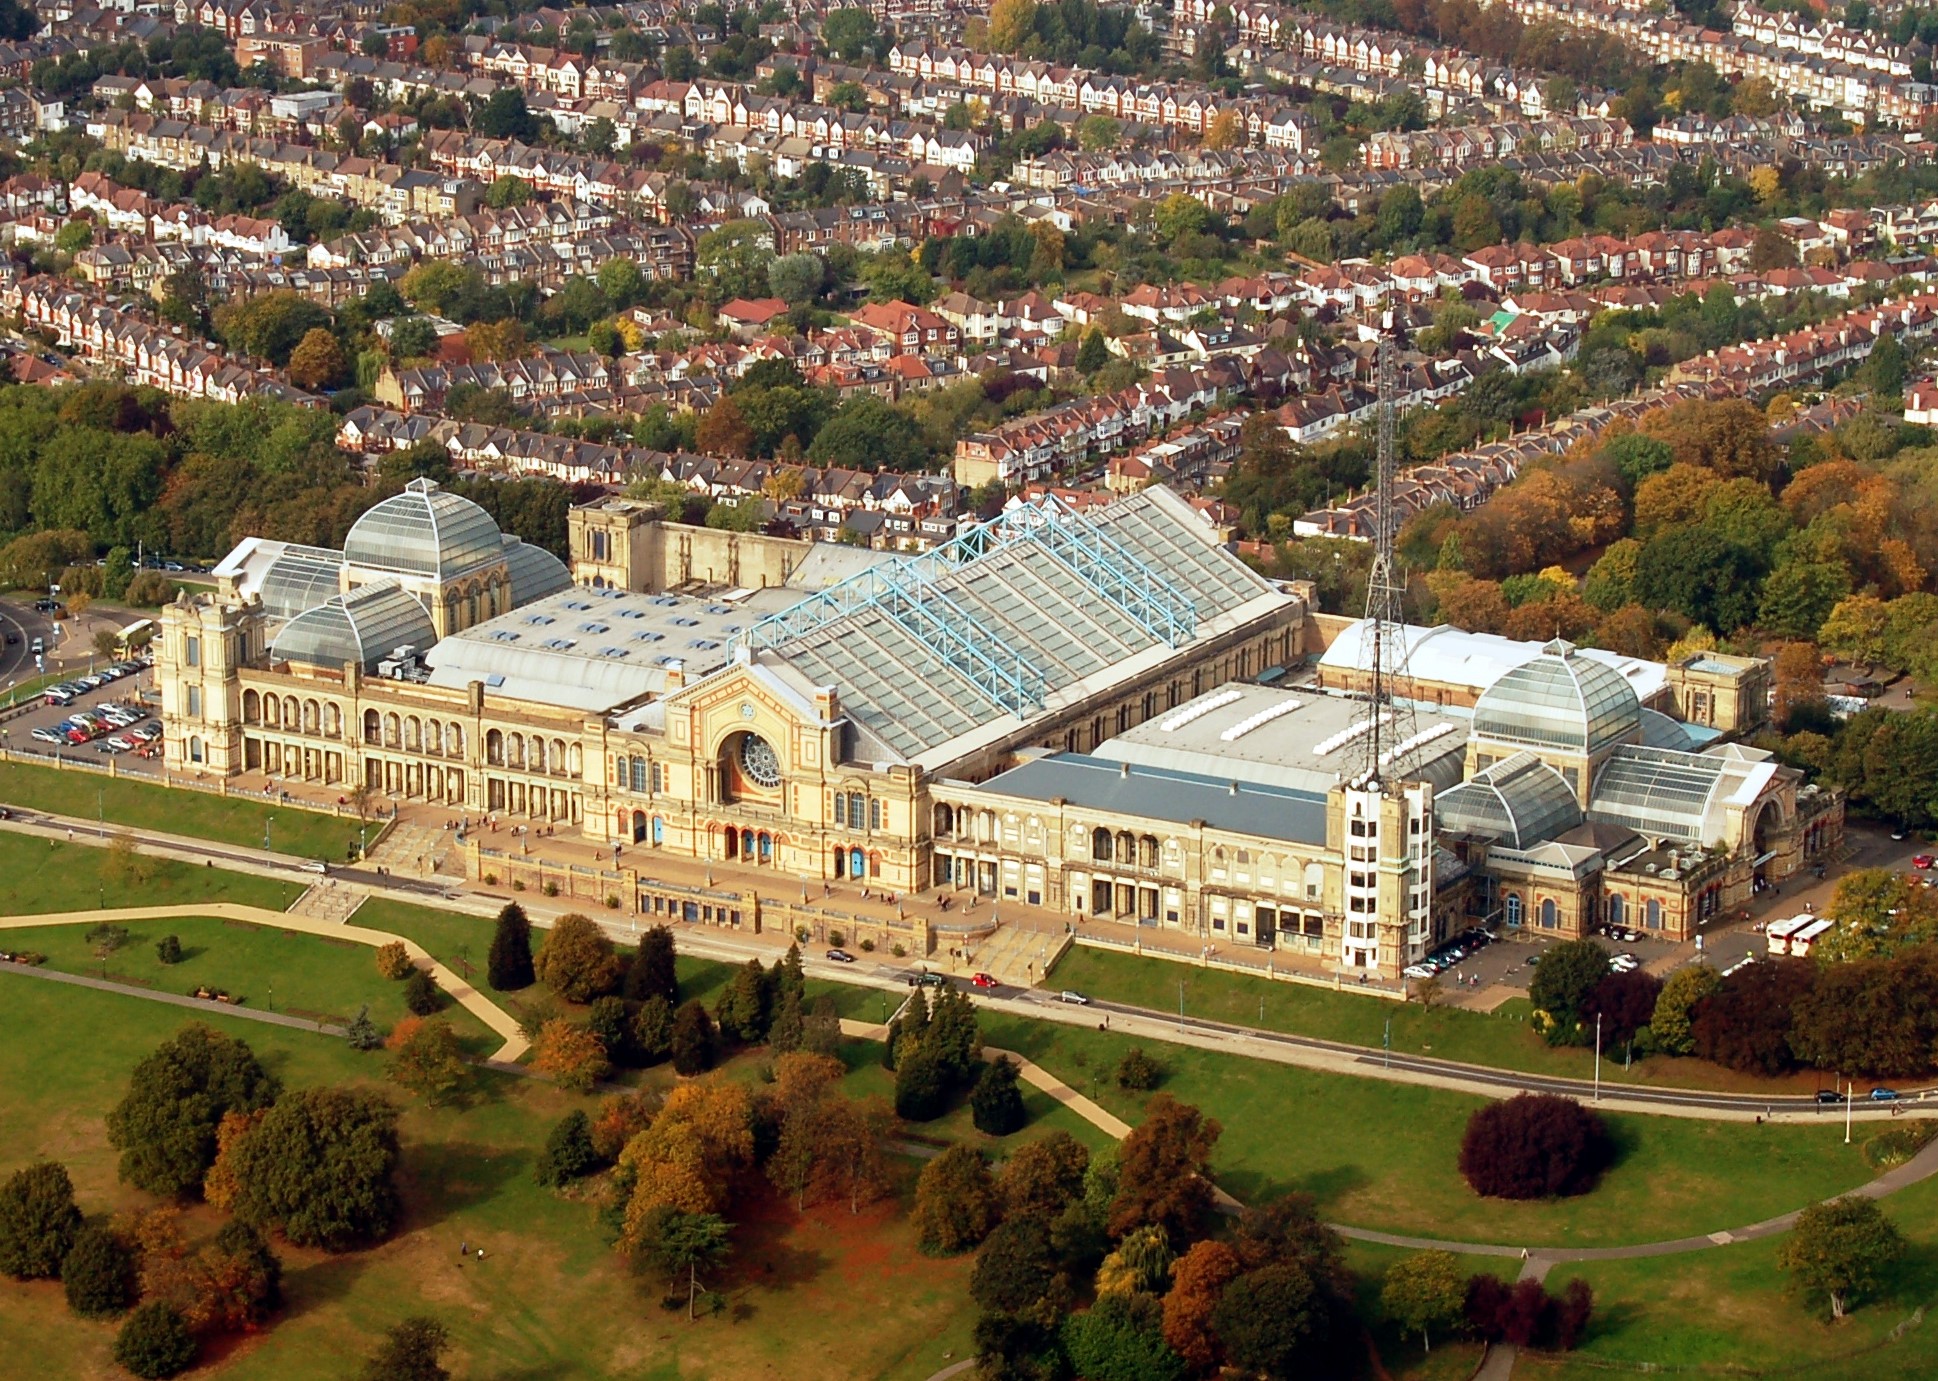 Alexandra_Palace_from_air_2009_(cropped).jpg